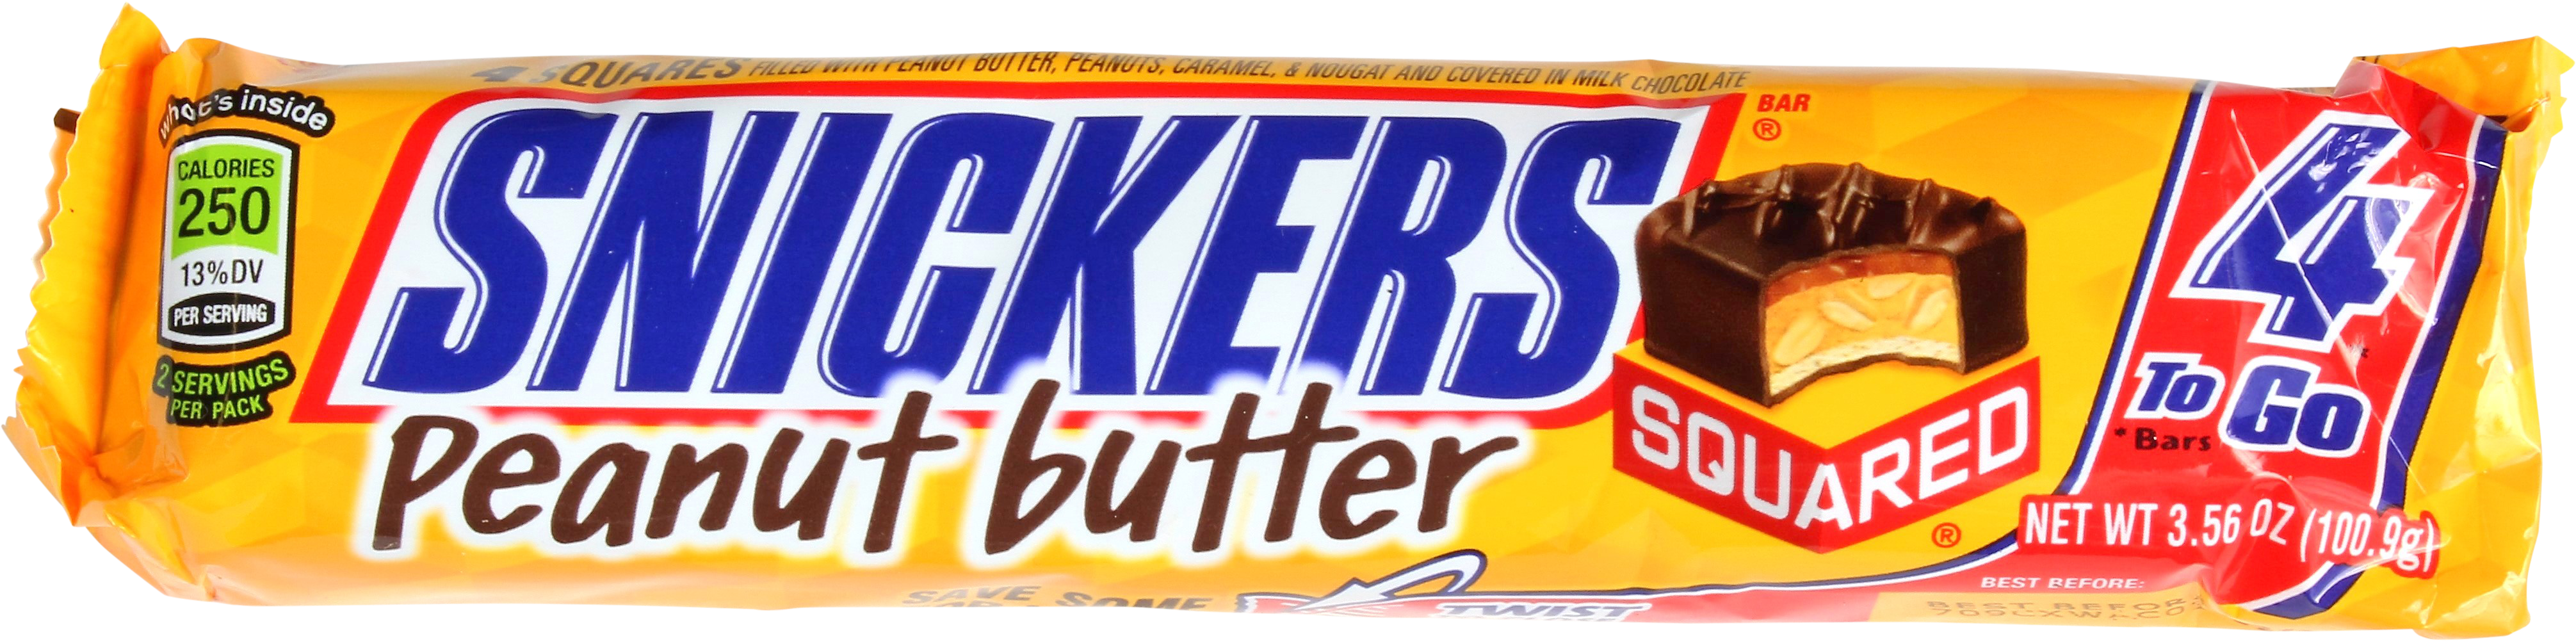 Snickers Peanut Butter Squared Packaging